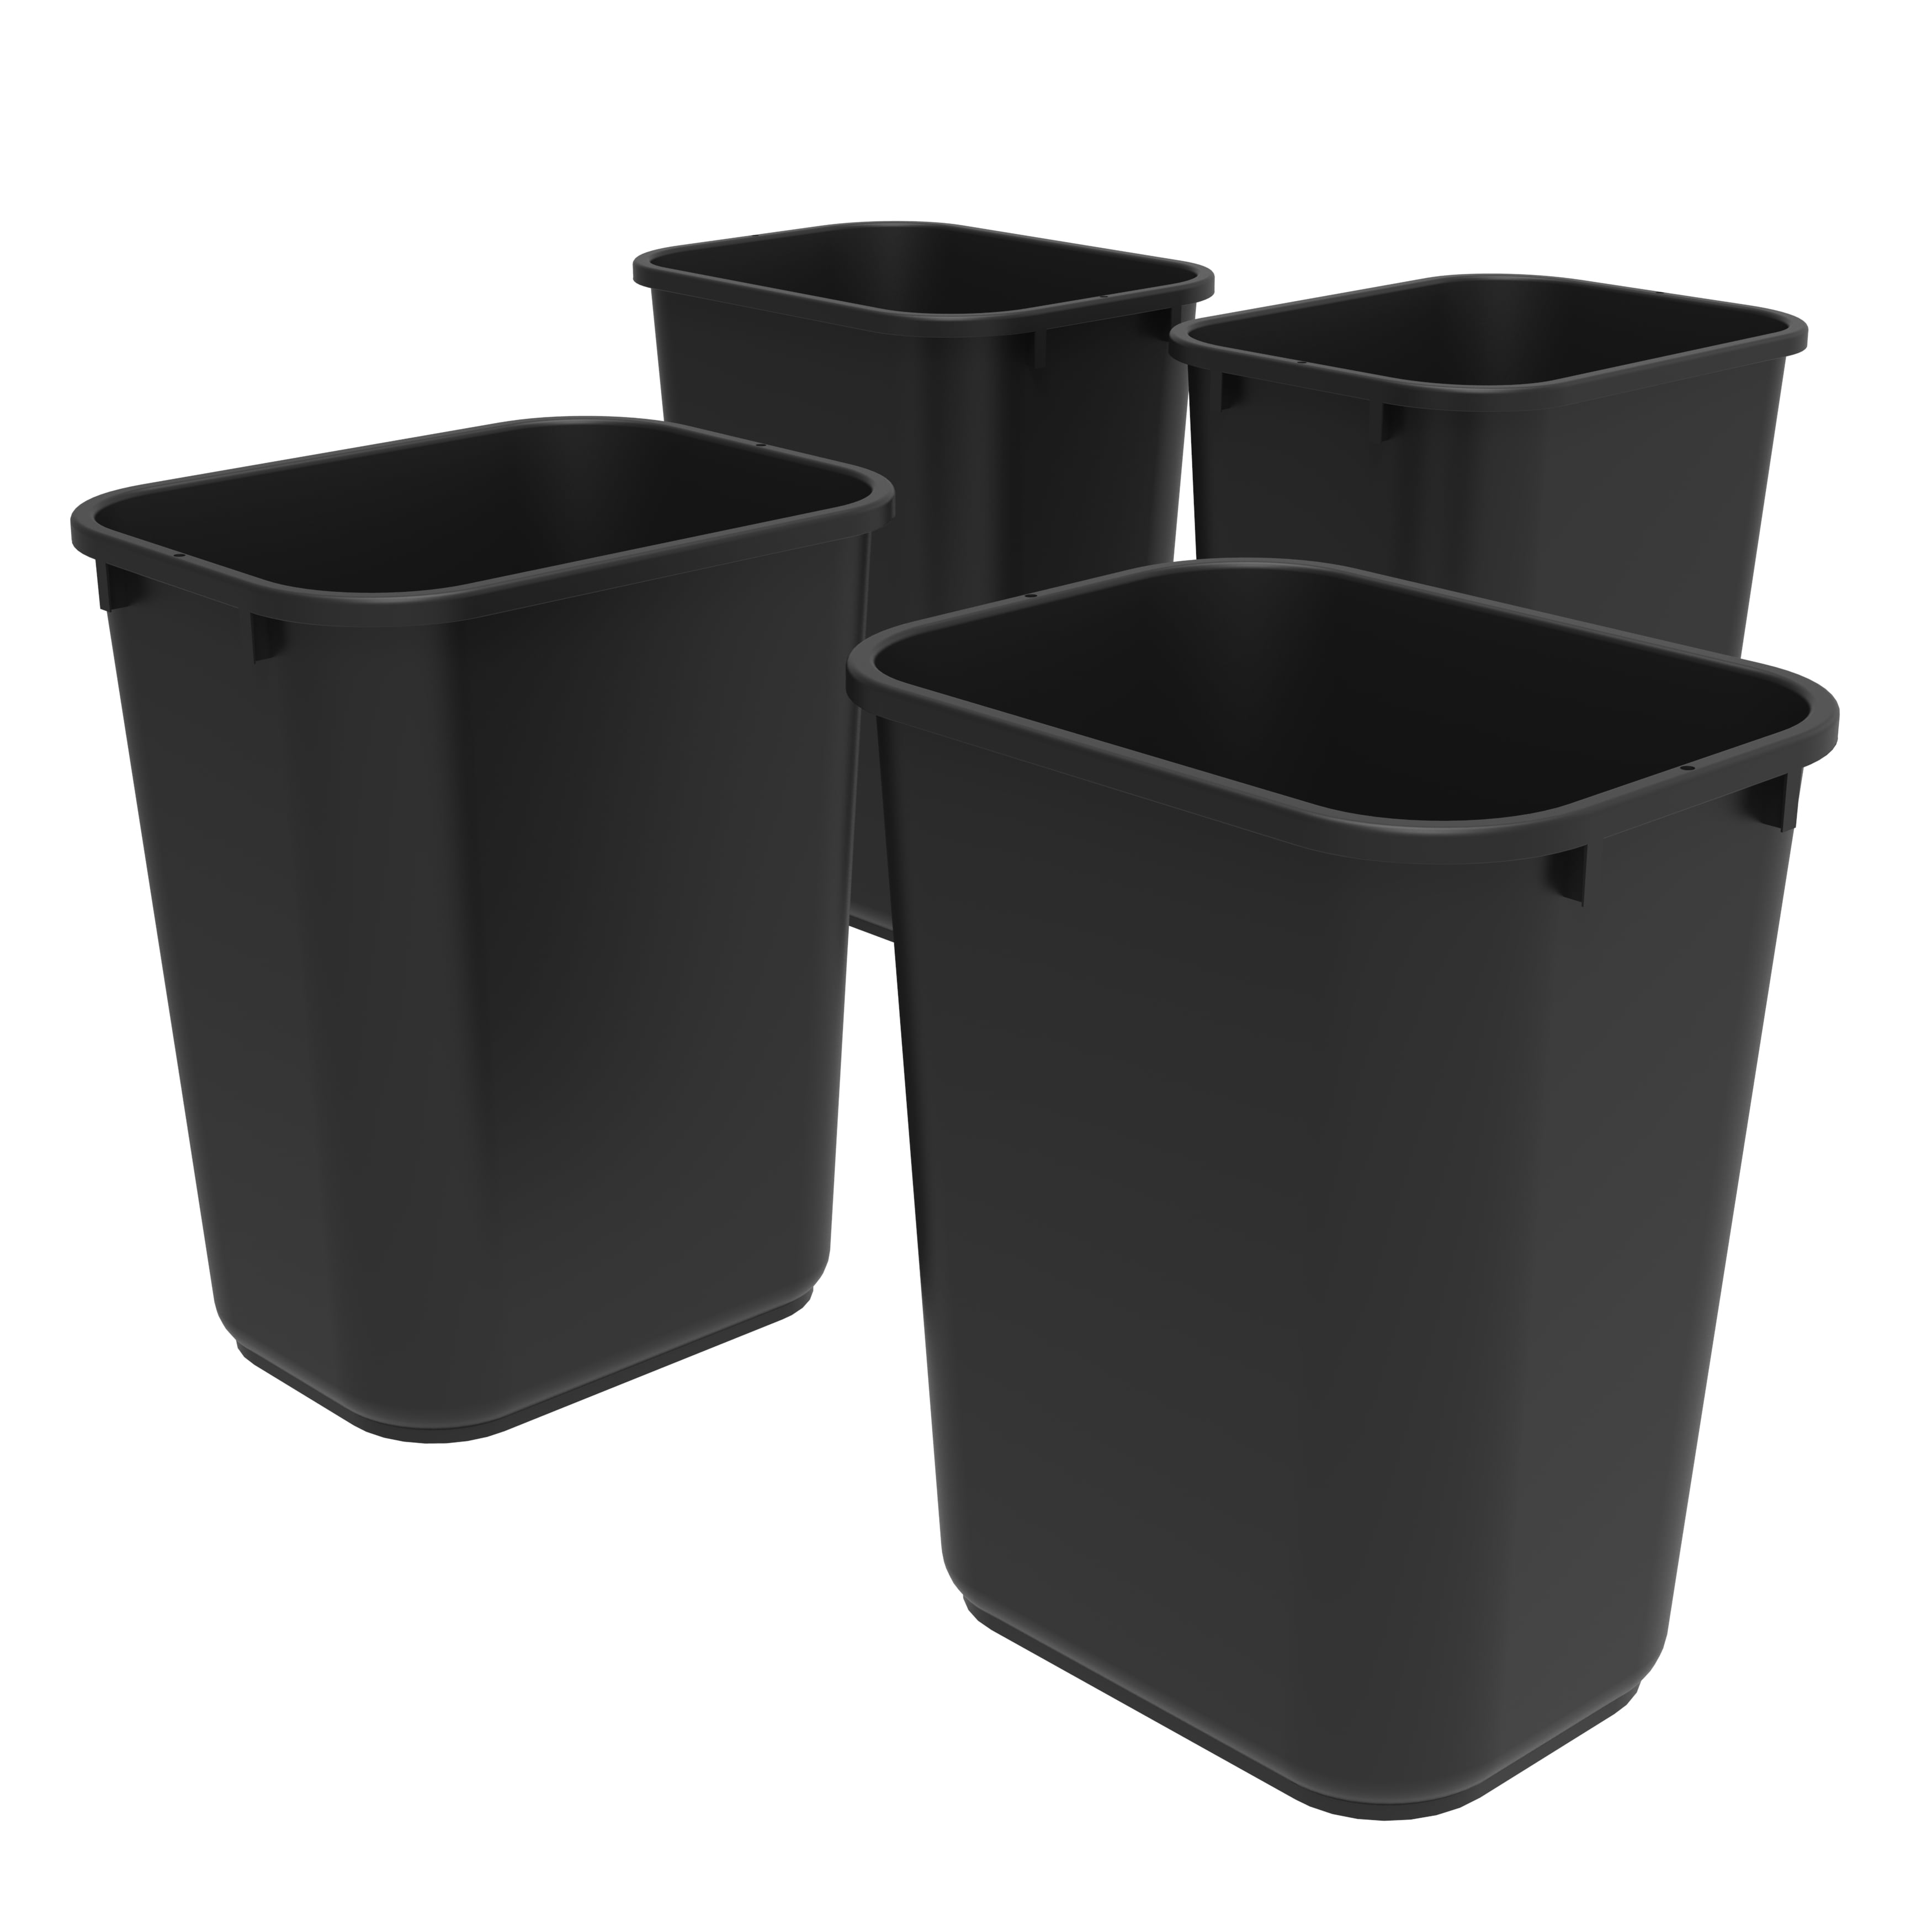 Storex Large/Tall Waste Basket 15.5 x 11 x 20.75 Inches Gray Case of 4 00701U04C 